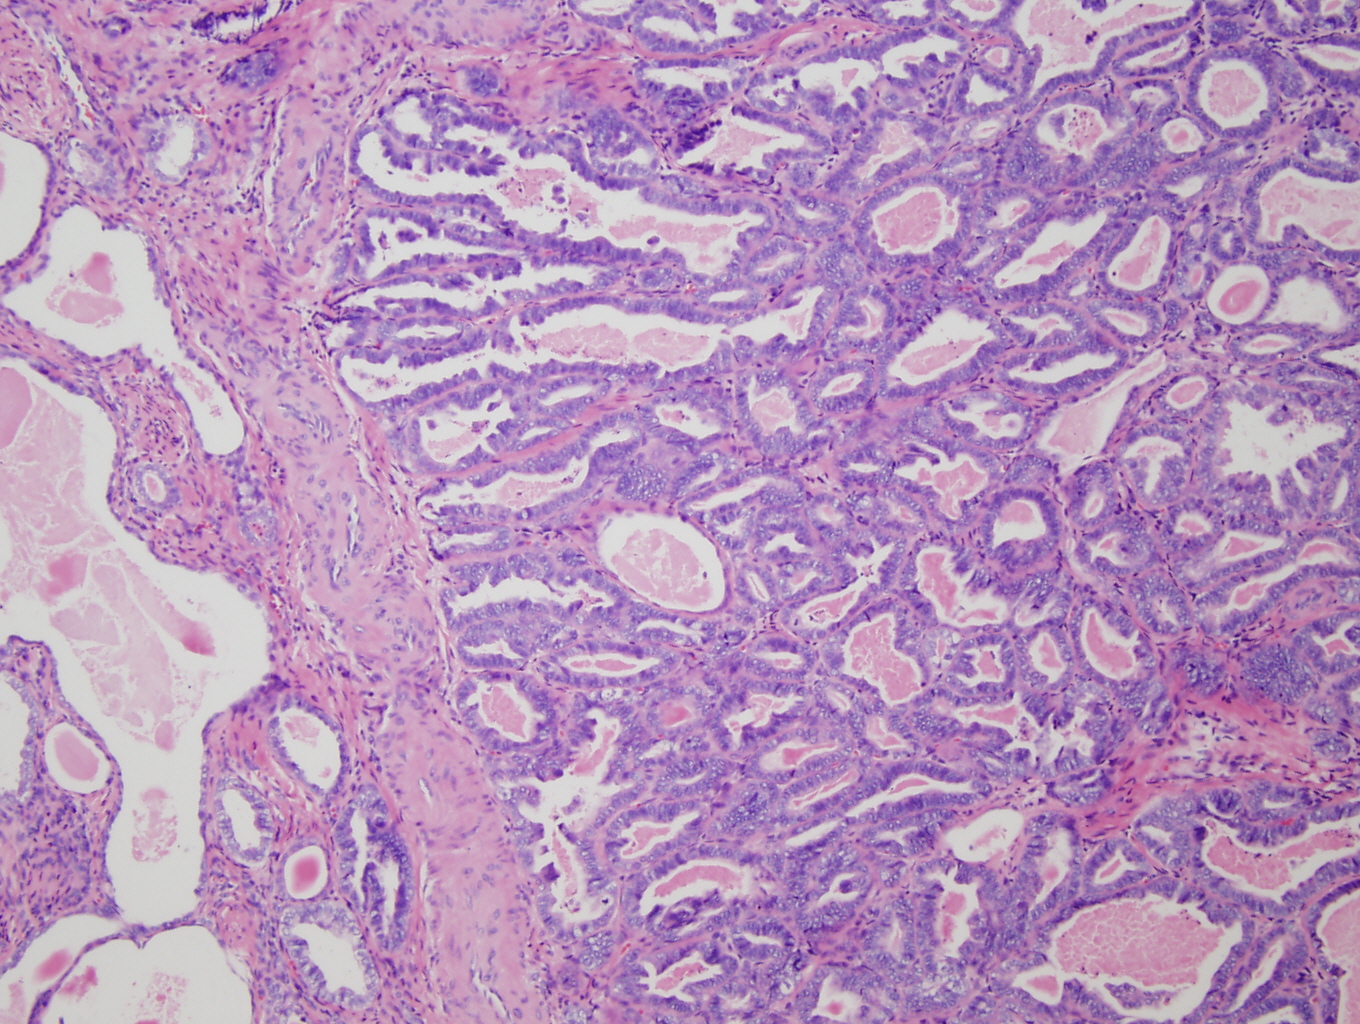 Figure 3: Mid-power (10X) view of tumor from cervix showing angulated glands adjacent to scattered cystically dilated and small tubules. These structures are lined by columnar to cuboidal to flattened cells with hyperchromatic nuclei. Dense, eosinophillic intraluminal secretions are a prominent feature.